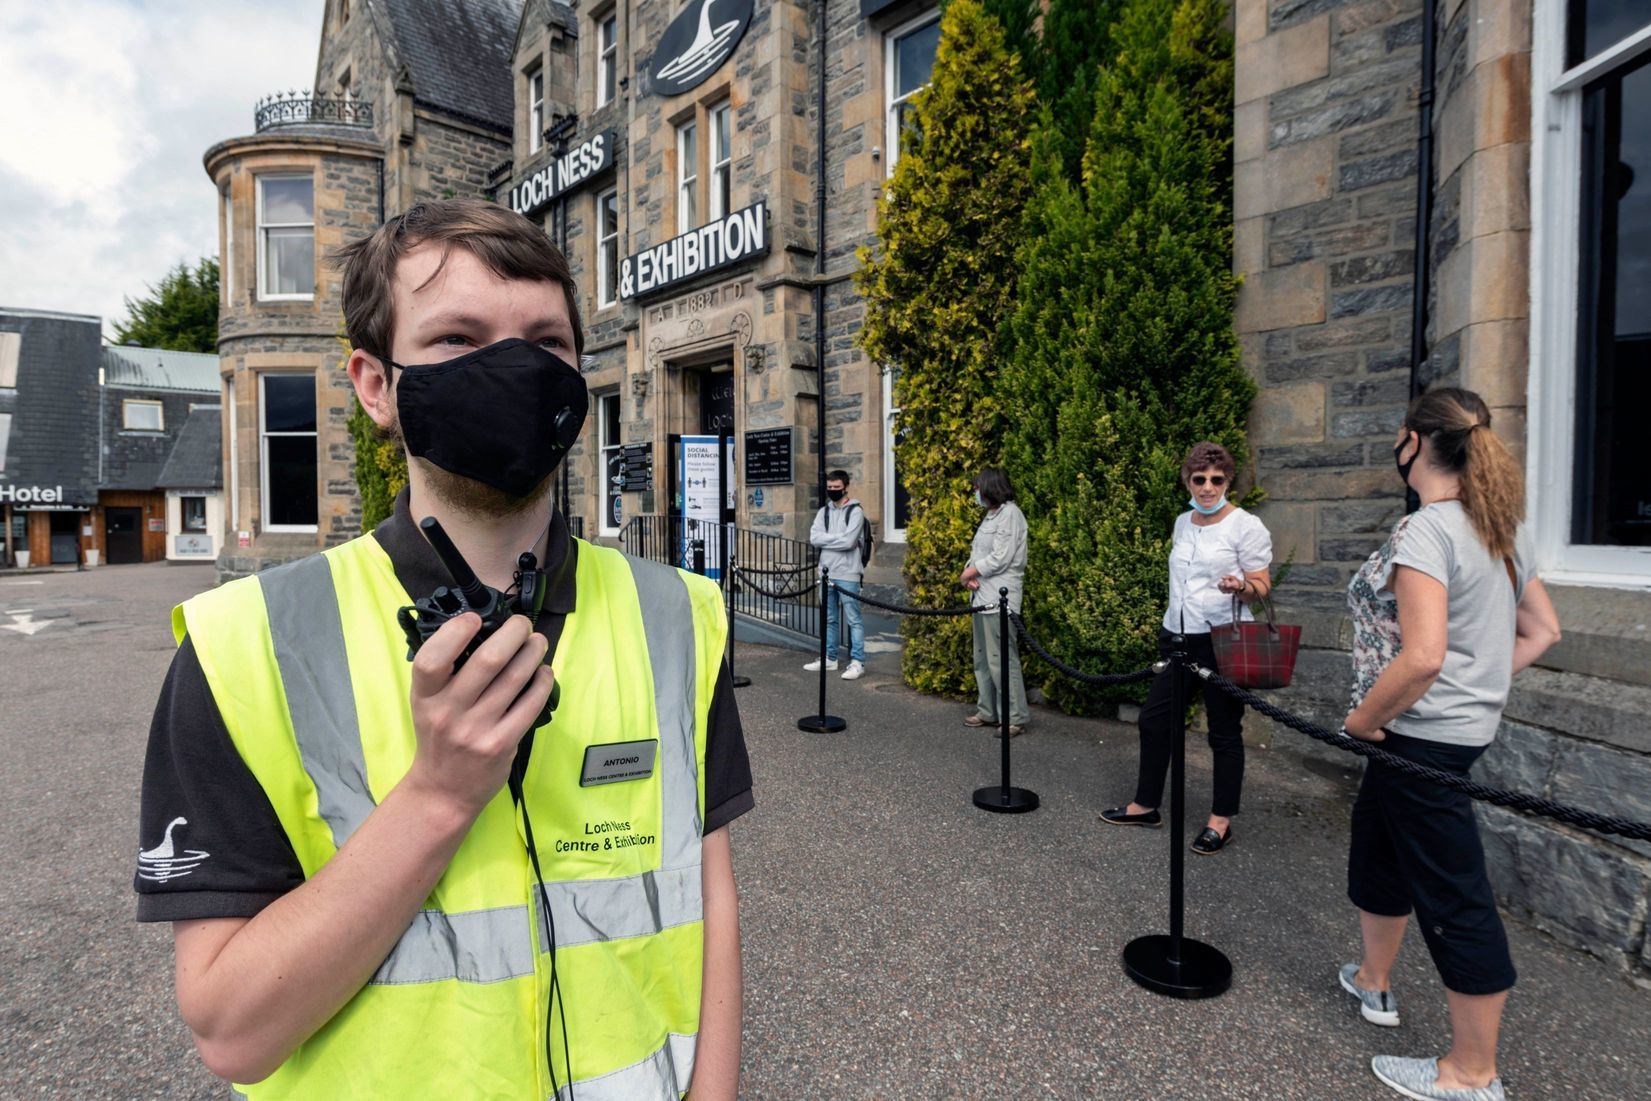 Loch Ness Centre and Exhibtion has introduced a number of measures to ensure ghe safety of its visitors.